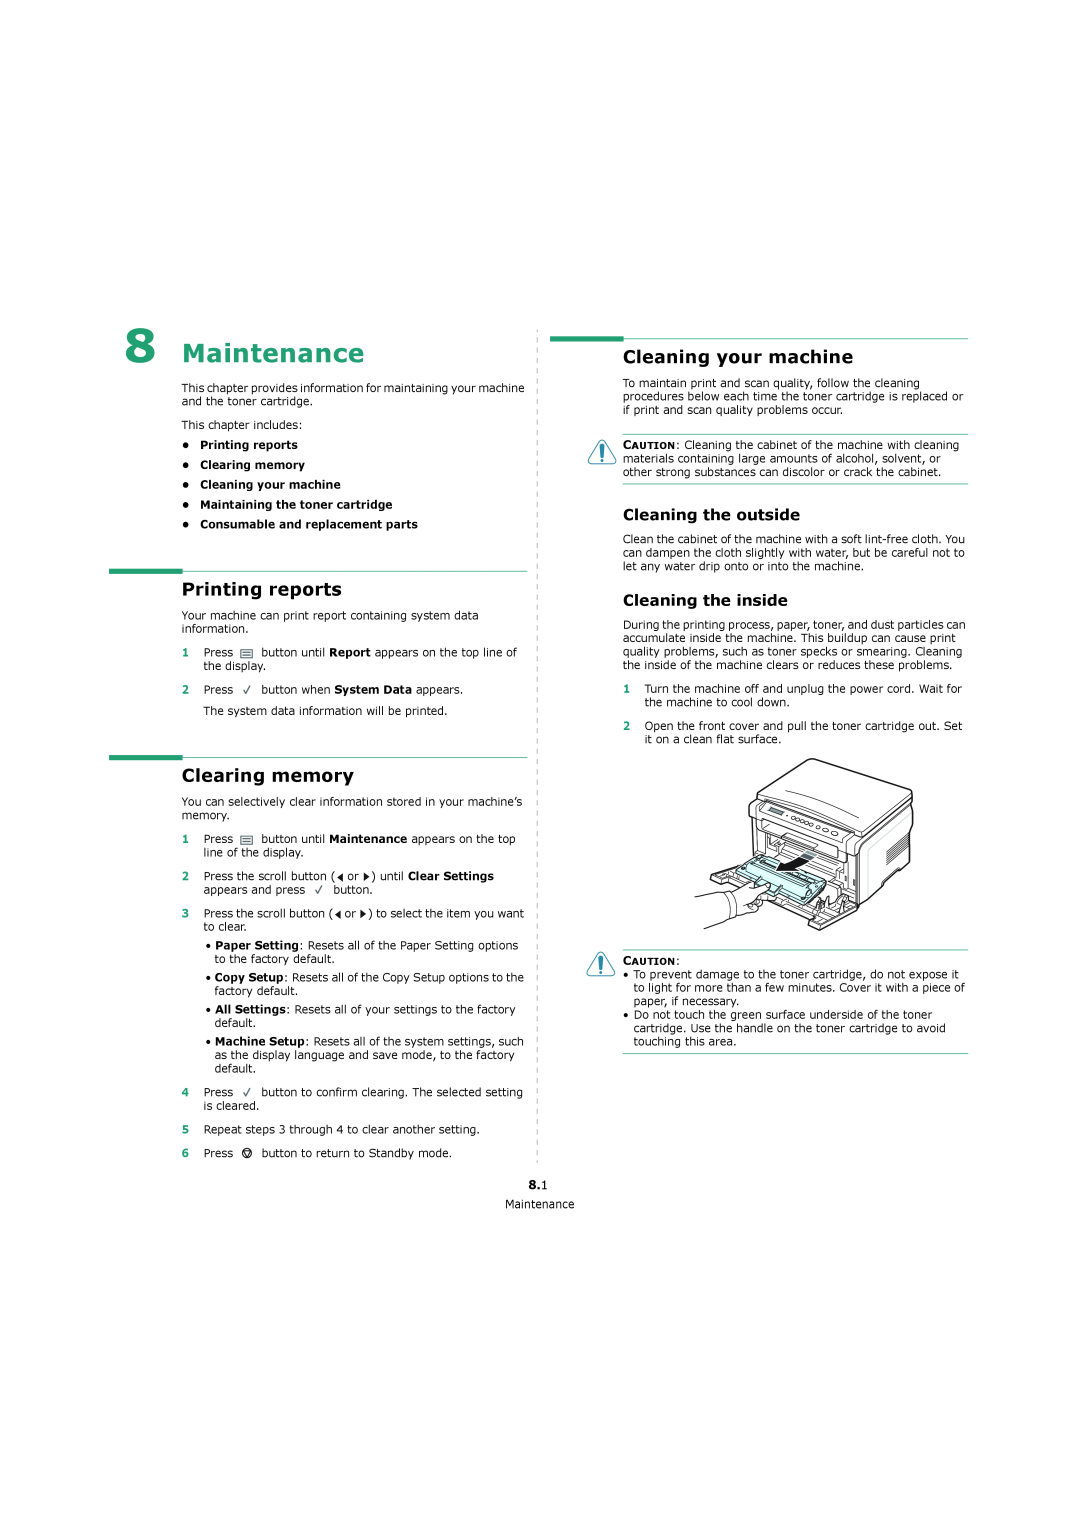 Xerox 3119 manual Maintenance, Printing reports, Clearing memory, Cleaning your machine, Cleaning the outside 